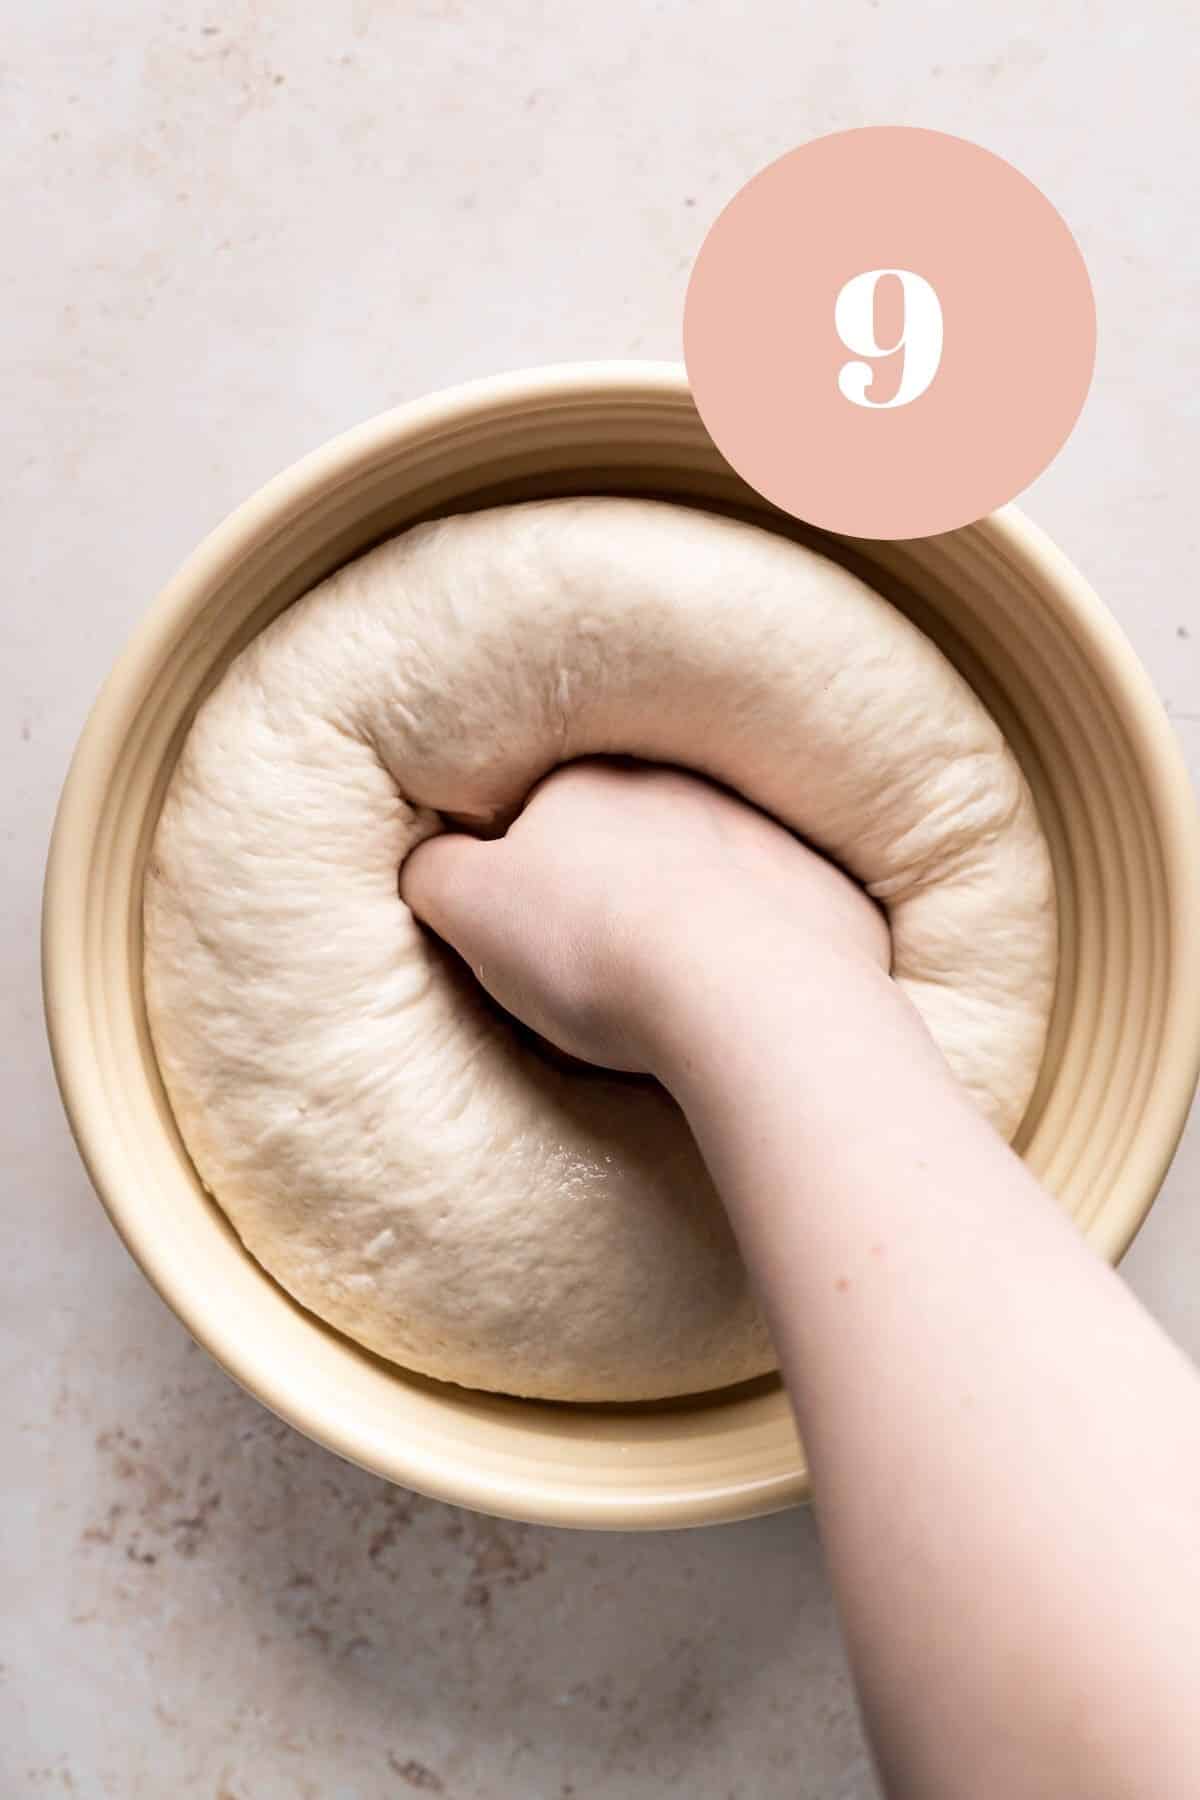 punching down the proofed soft pizza dough.